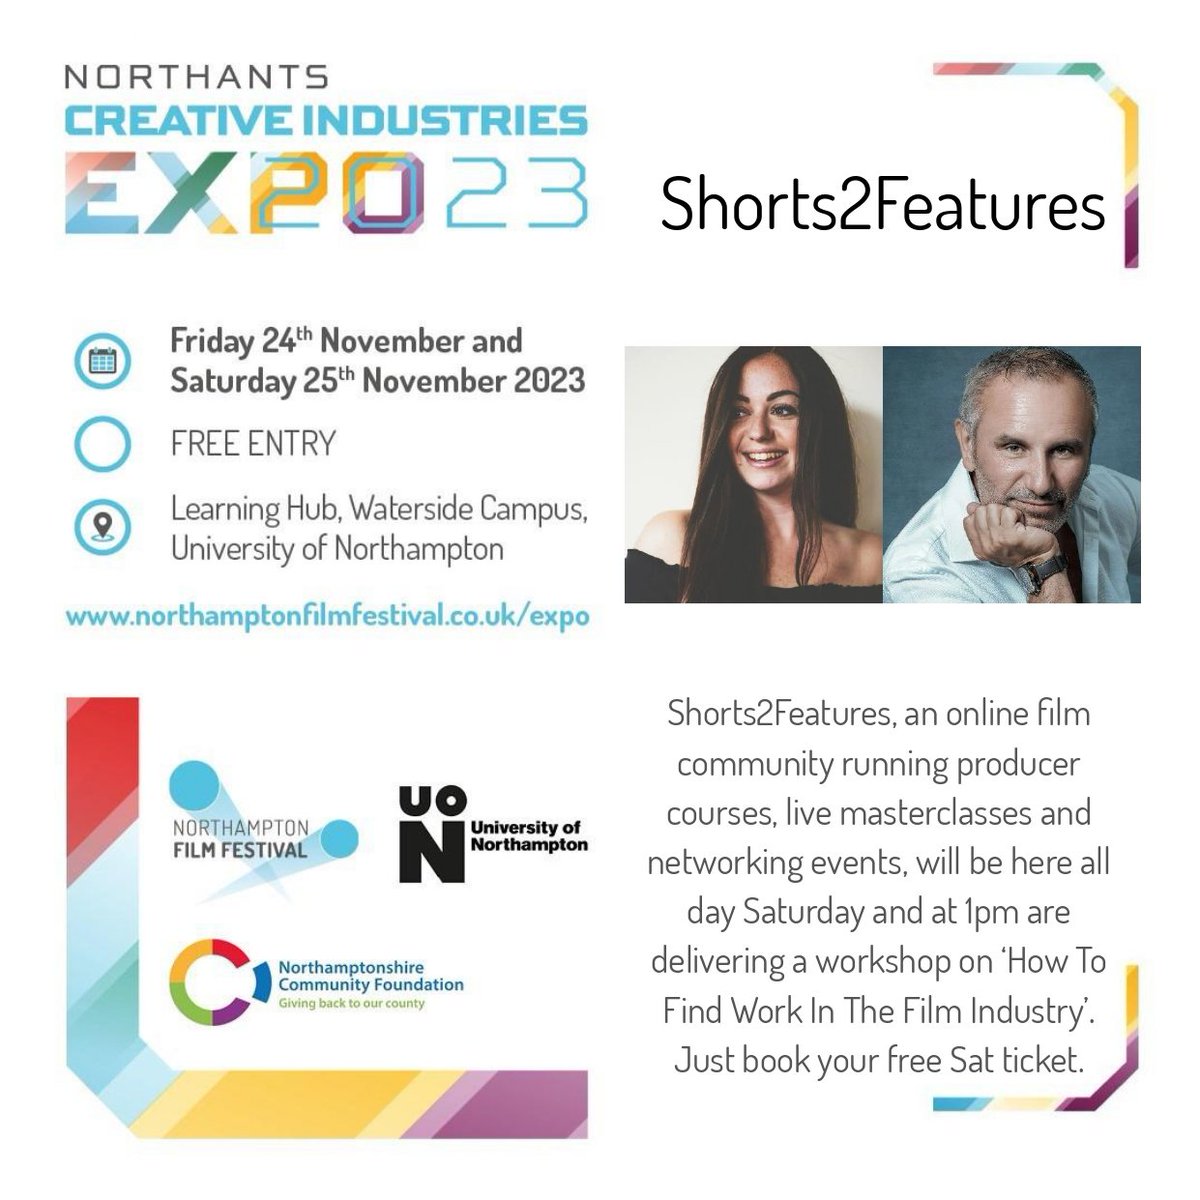 Interested in or starting out in the #filmindustry? Want some advice on how to find work? Come to our Expo on Saturday for this free talk northamptonfilmfestival.eventive.org/schedule/